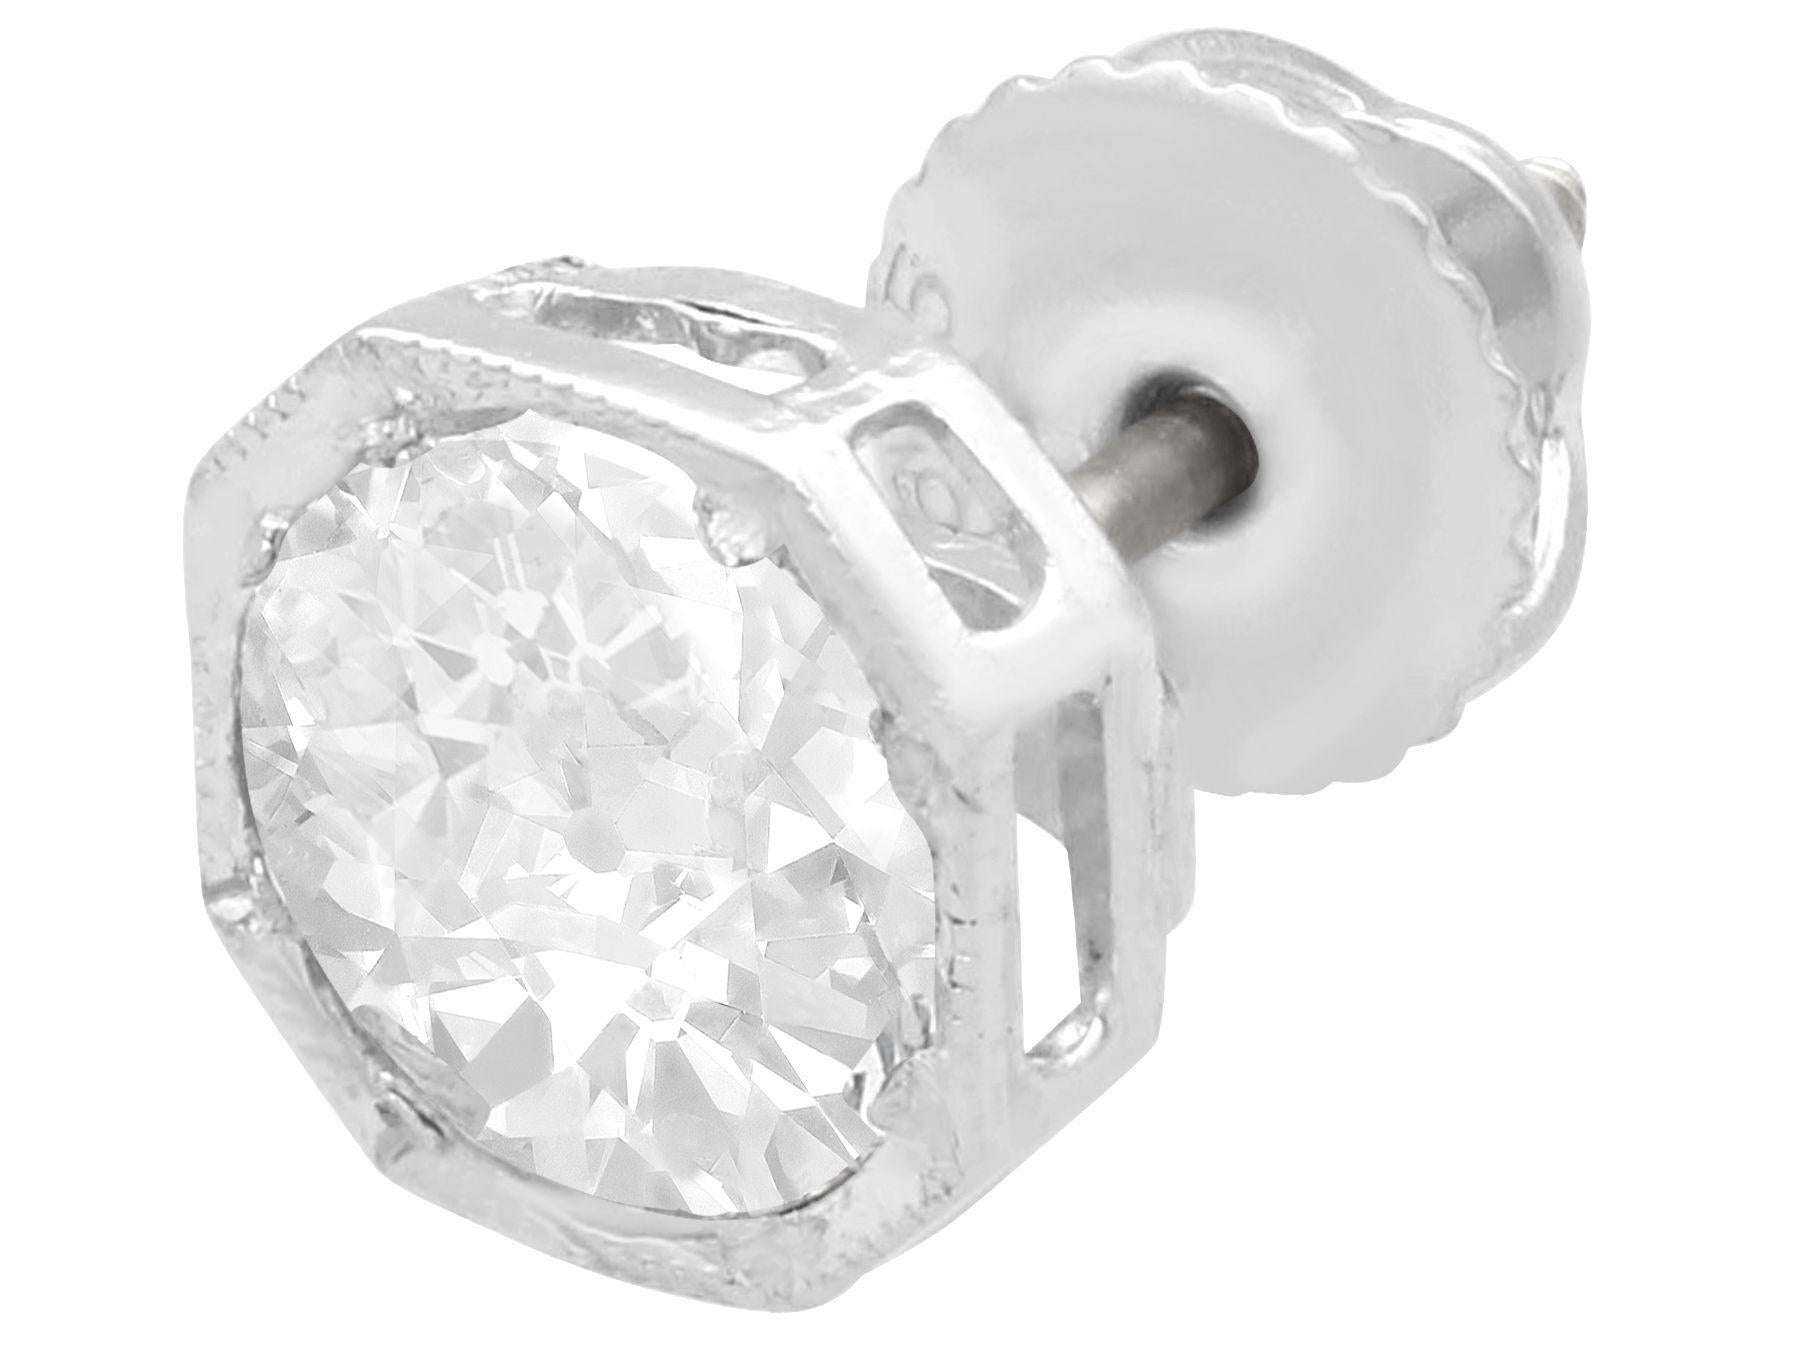 A stunning, fine and impressive pair of antique 2.02 carat diamond and contemporary platinum stud earrings; part of our diverse diamond jewelry and estate jewelry collections.

These stunning, fine and impressive diamond stud earrings with